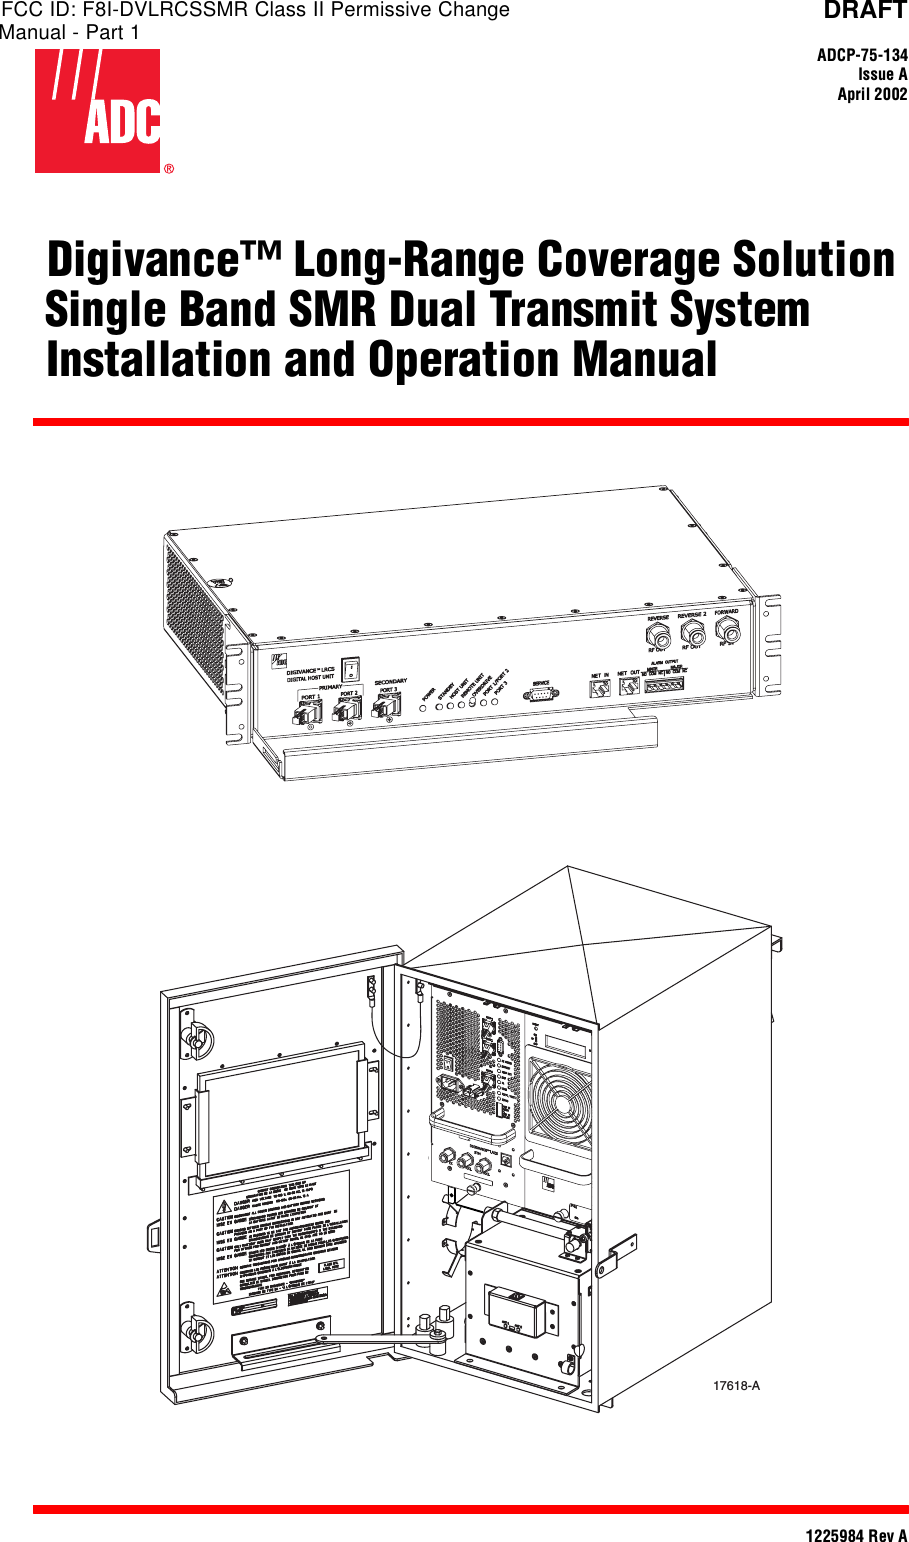 DRAFTADCP-75-134Issue AApril 20021225984 Rev A(Digivance™ Long-Range Coverage Solution Single Band SMR Dual Transmit System(Installation and Operation Manual17618-AFCC ID: F8I-DVLRCSSMR Class II Permissive ChangeManual - Part 1